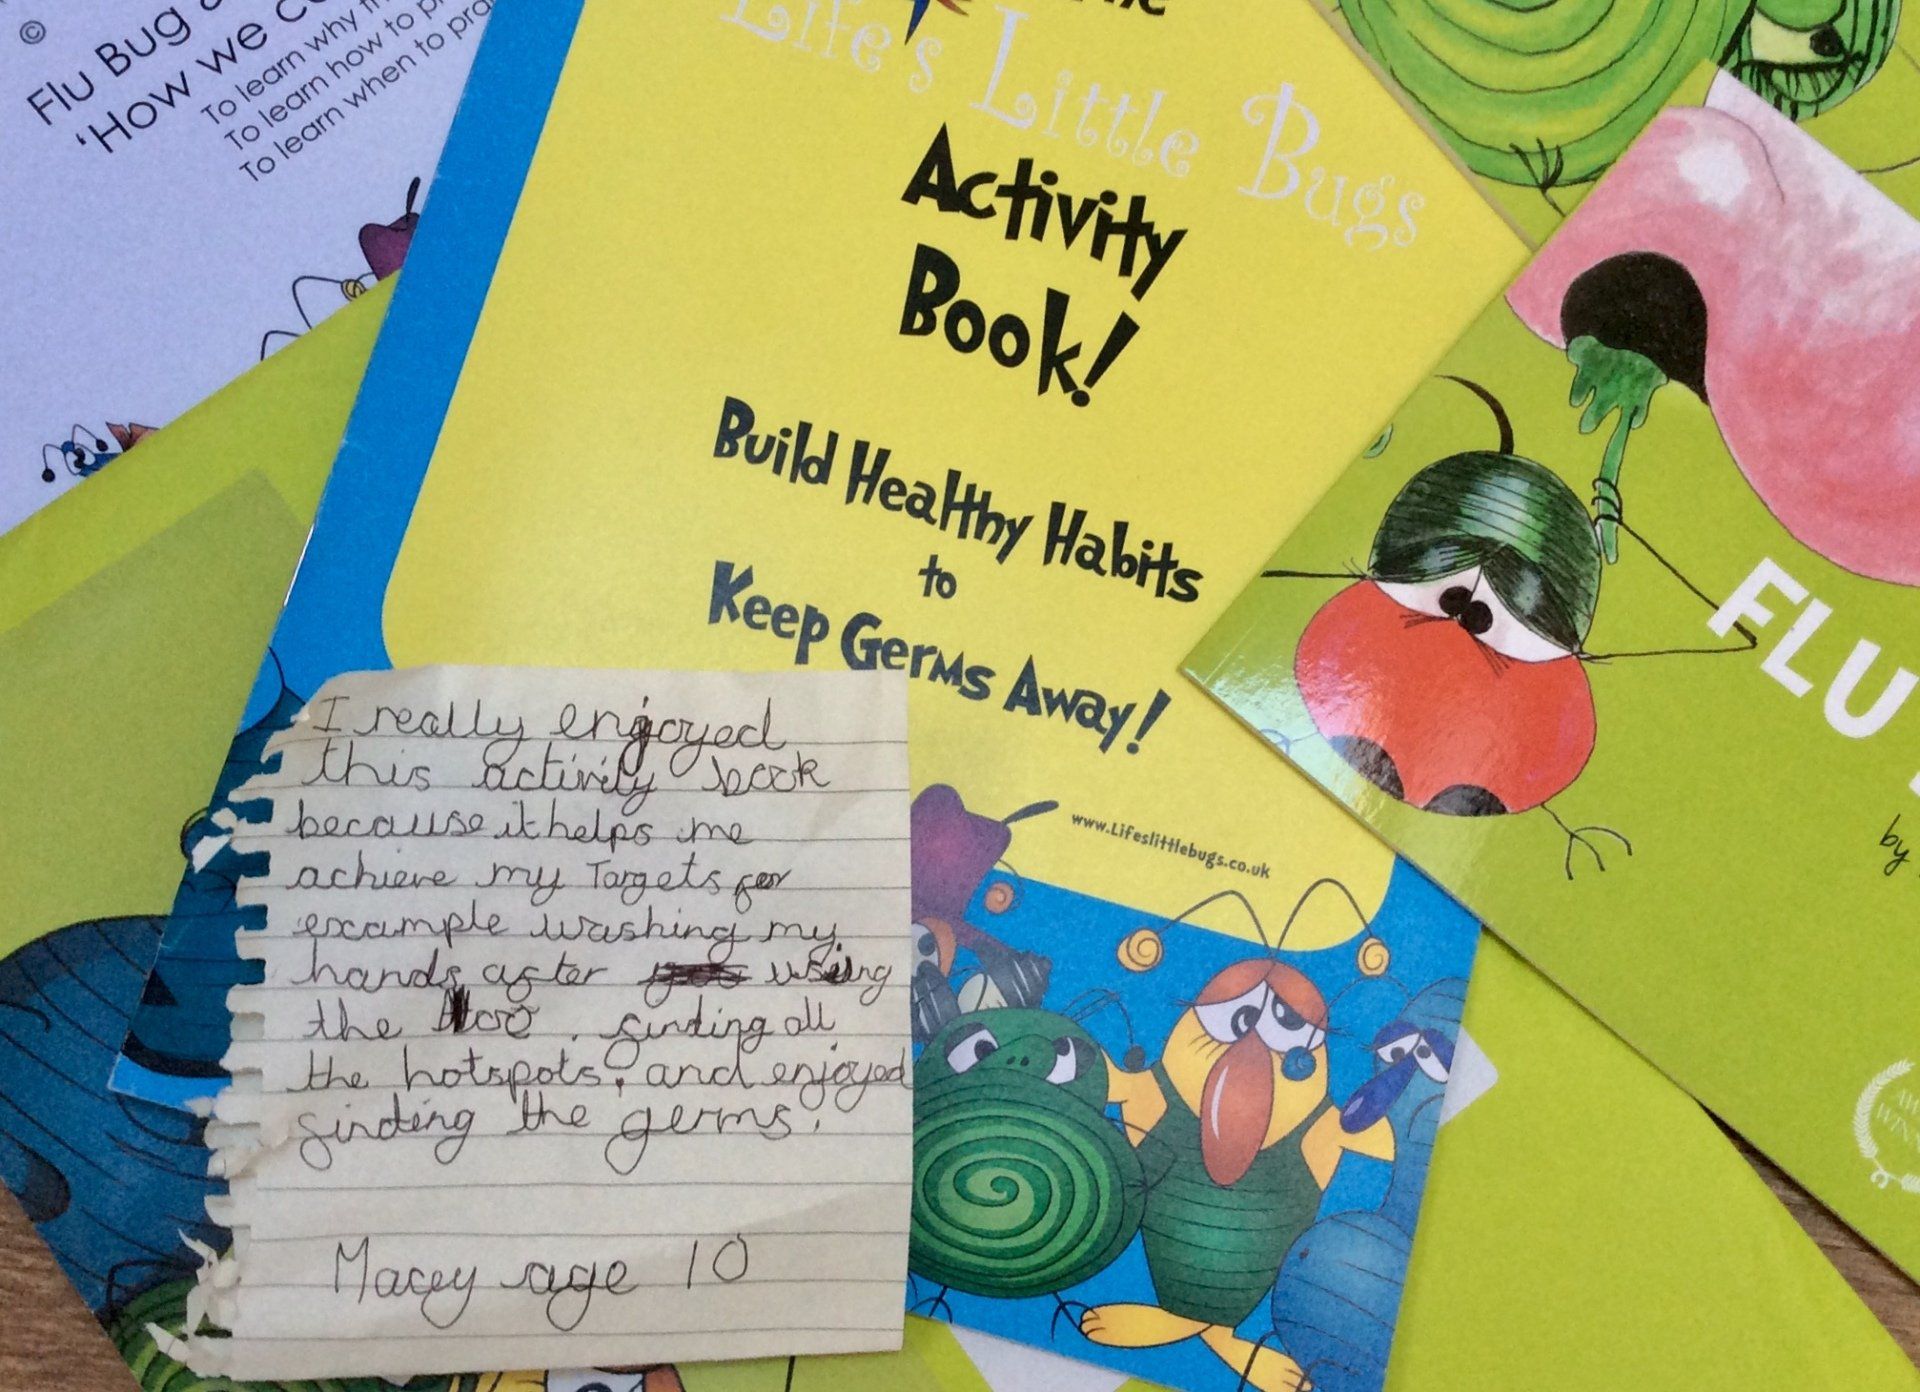 Our Healthy Habit activity pck to Keep germs away!